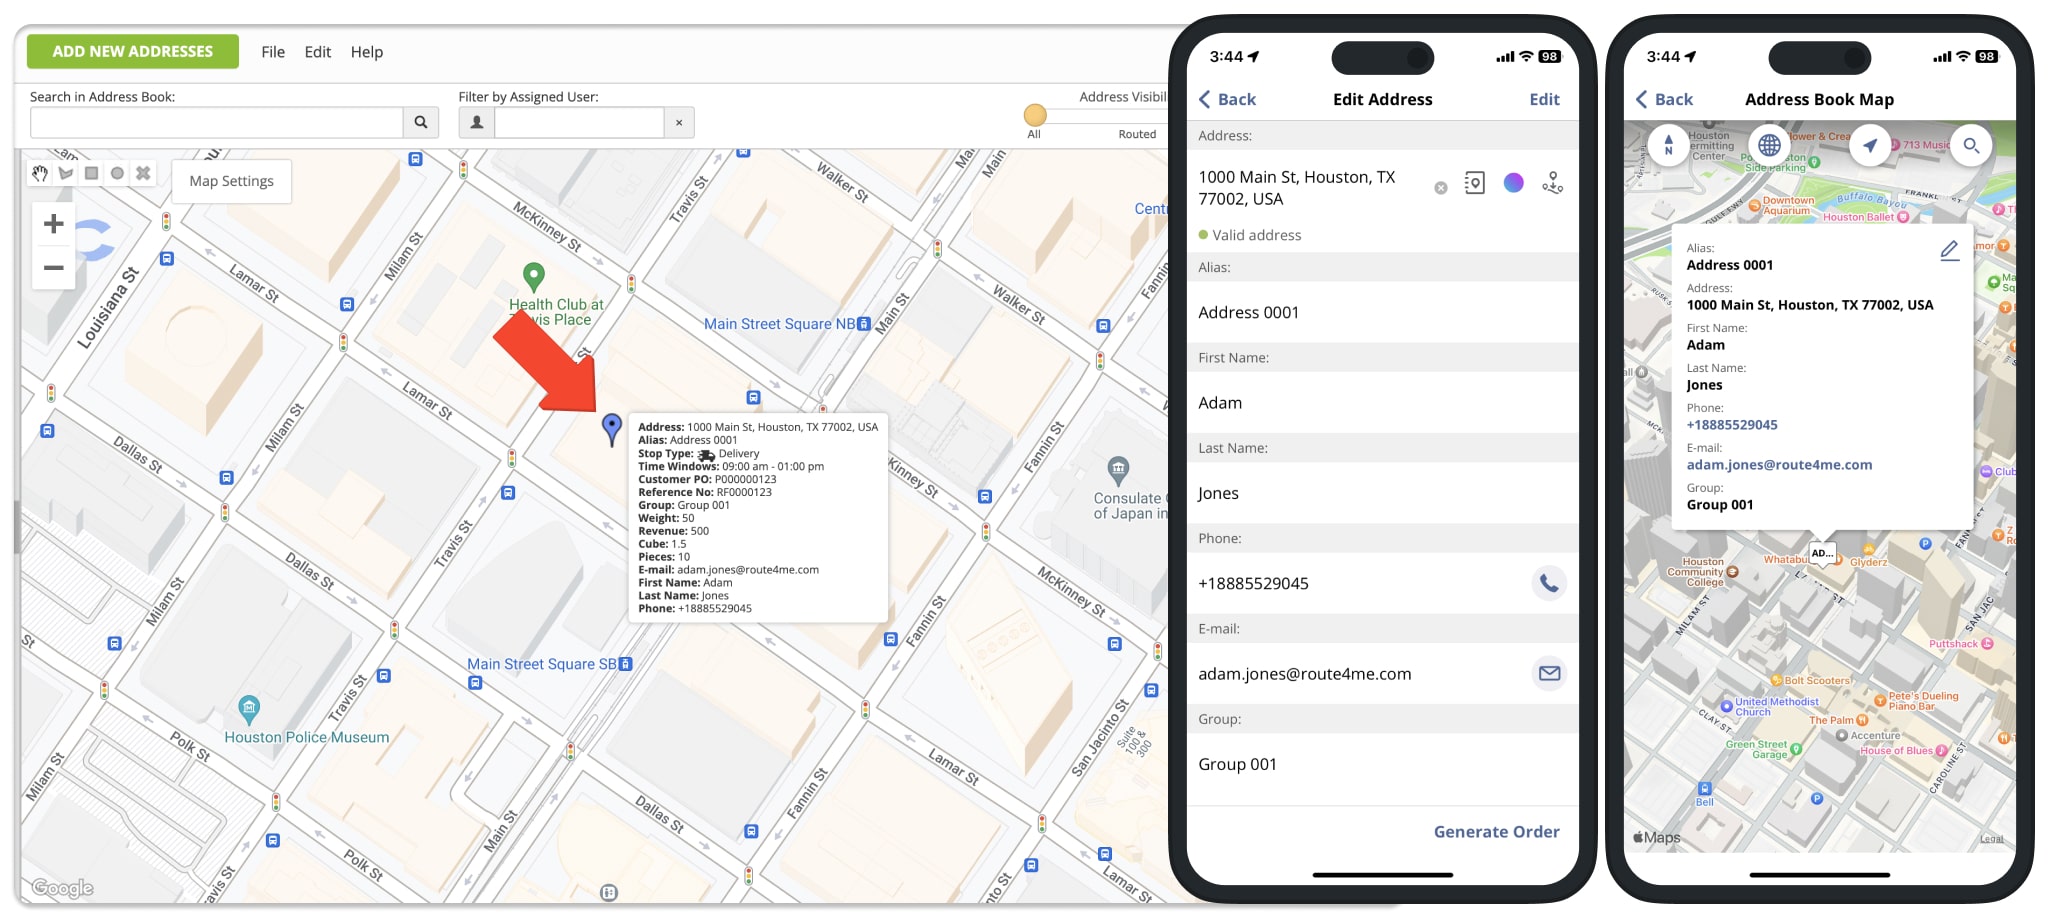 Route4Me's Address Book Map provides real-time address synchronization between the Web Platform and Mobile Driver apps.